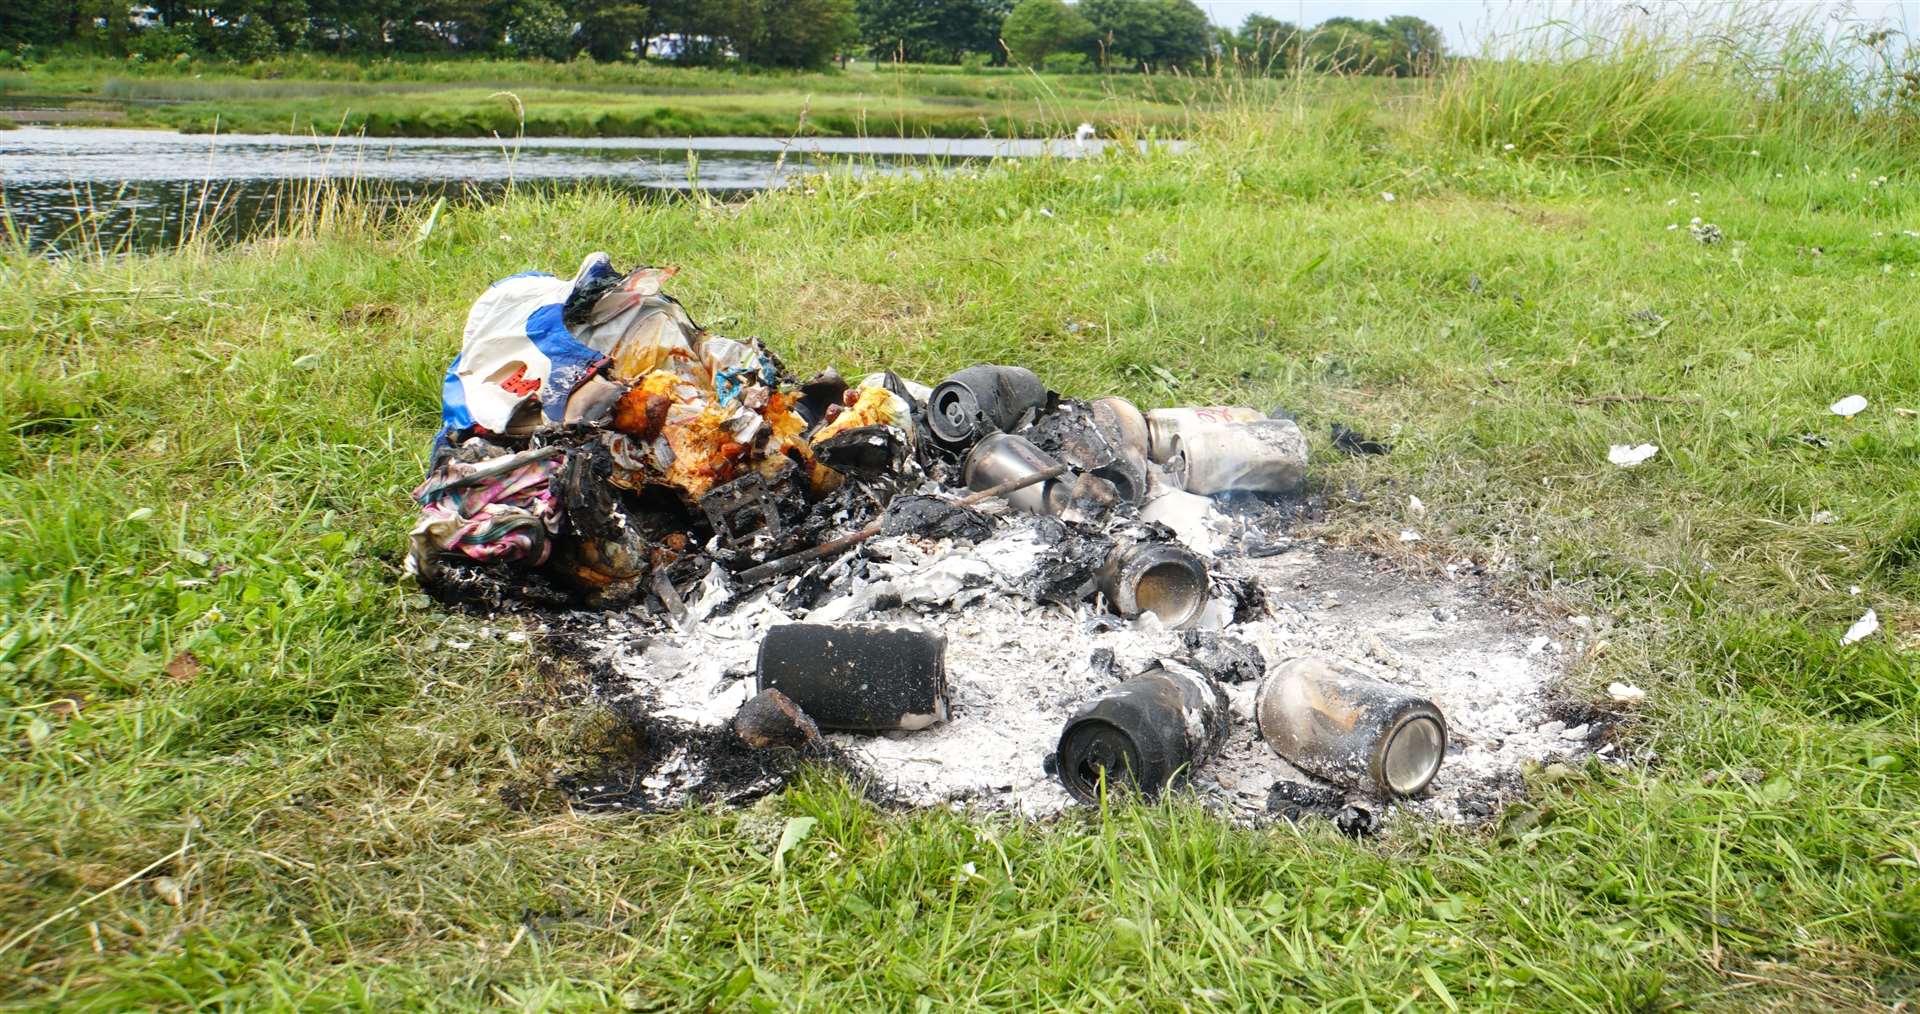 The remains of a camp fire with burnt cans and food wrappings left behind after the family vacated the area.